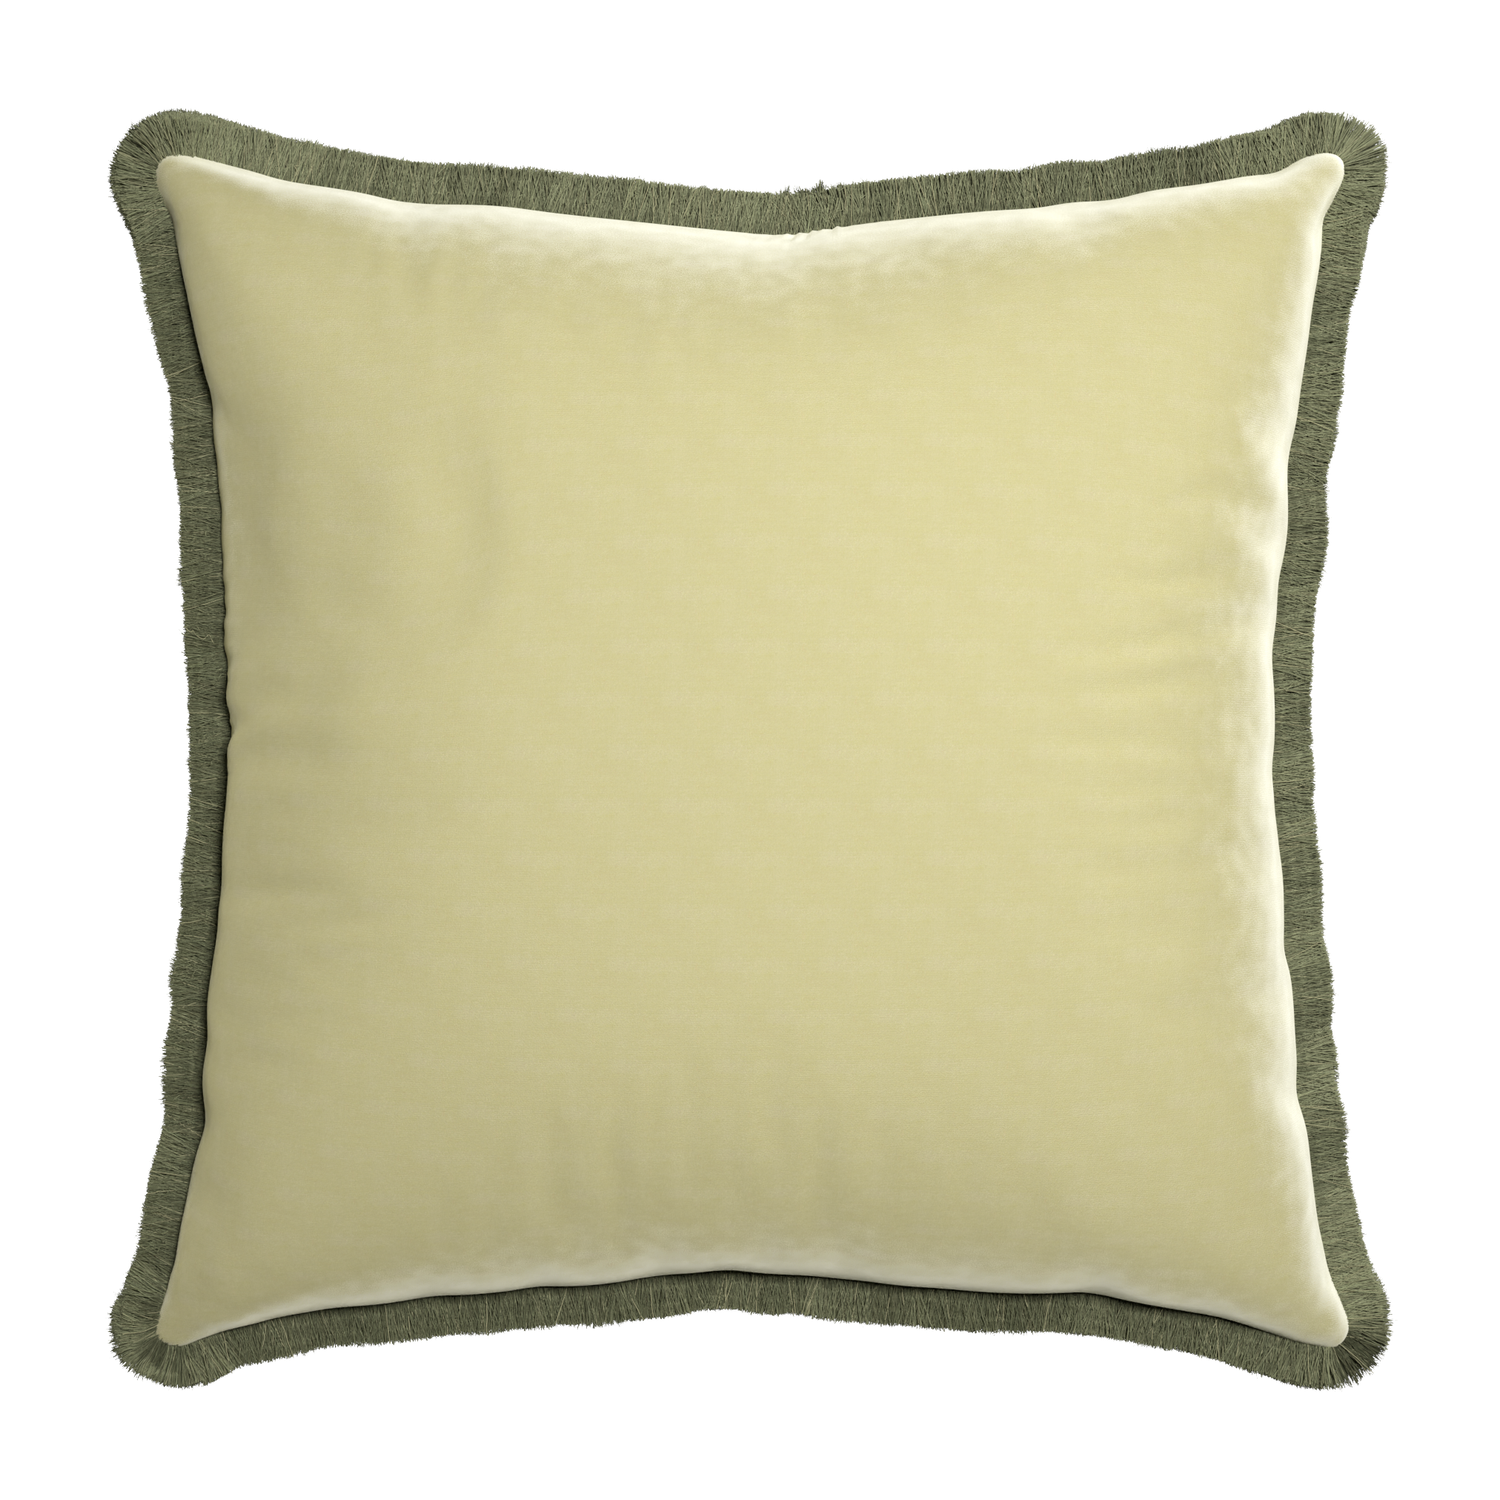 square light green pillow with sage green fringe